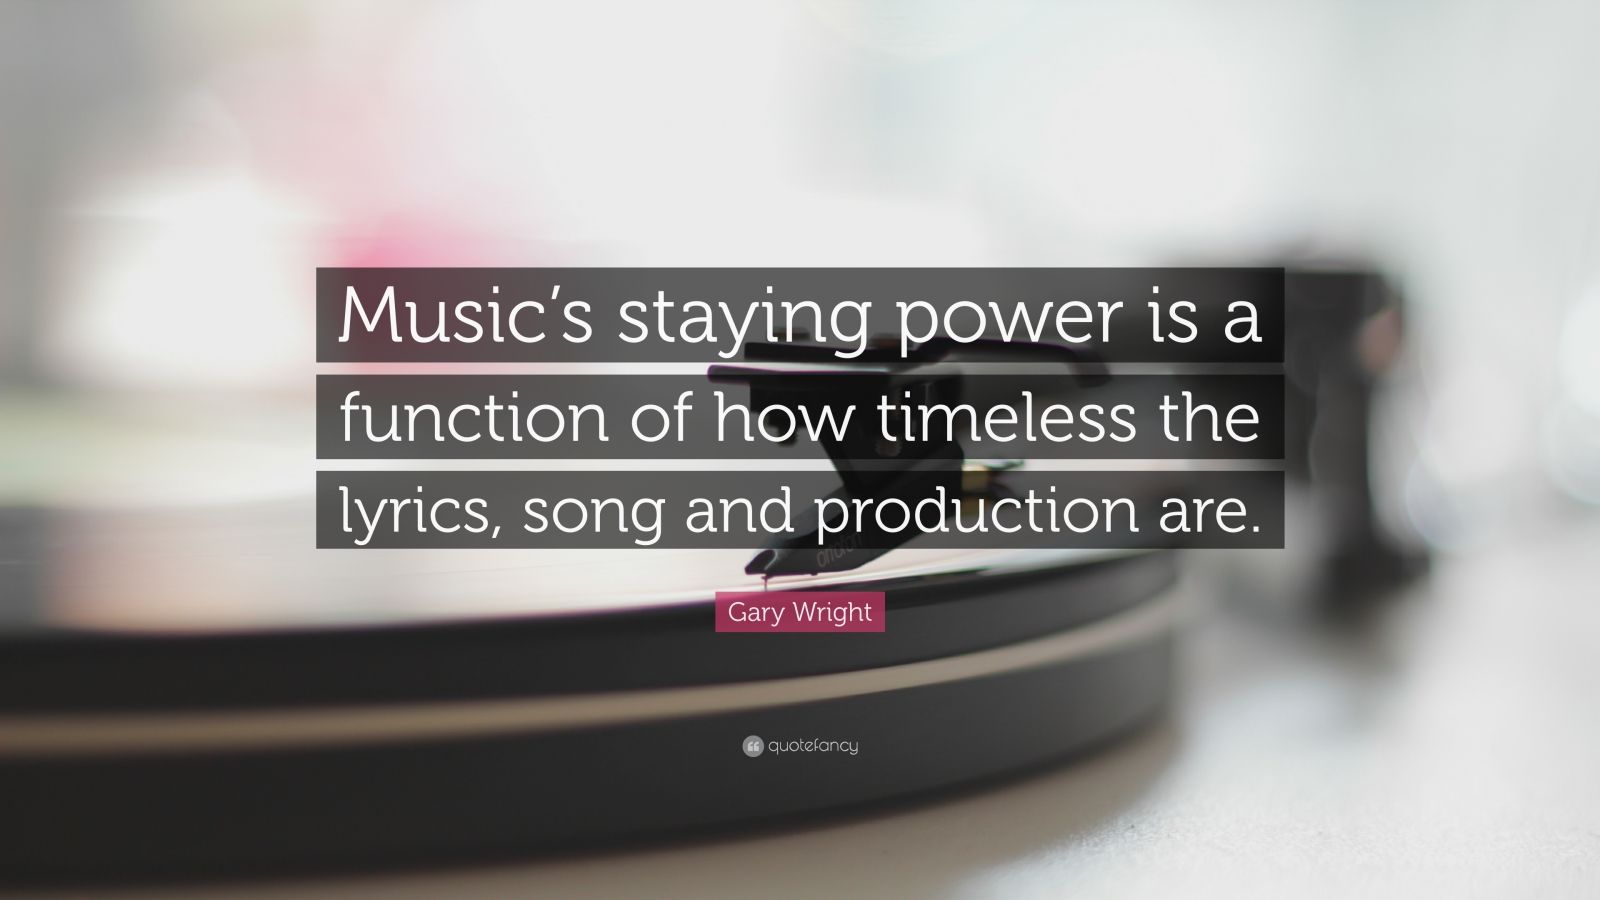 Gary Wright Quote: “Music's staying power is a function of how timeless the  lyrics, song and